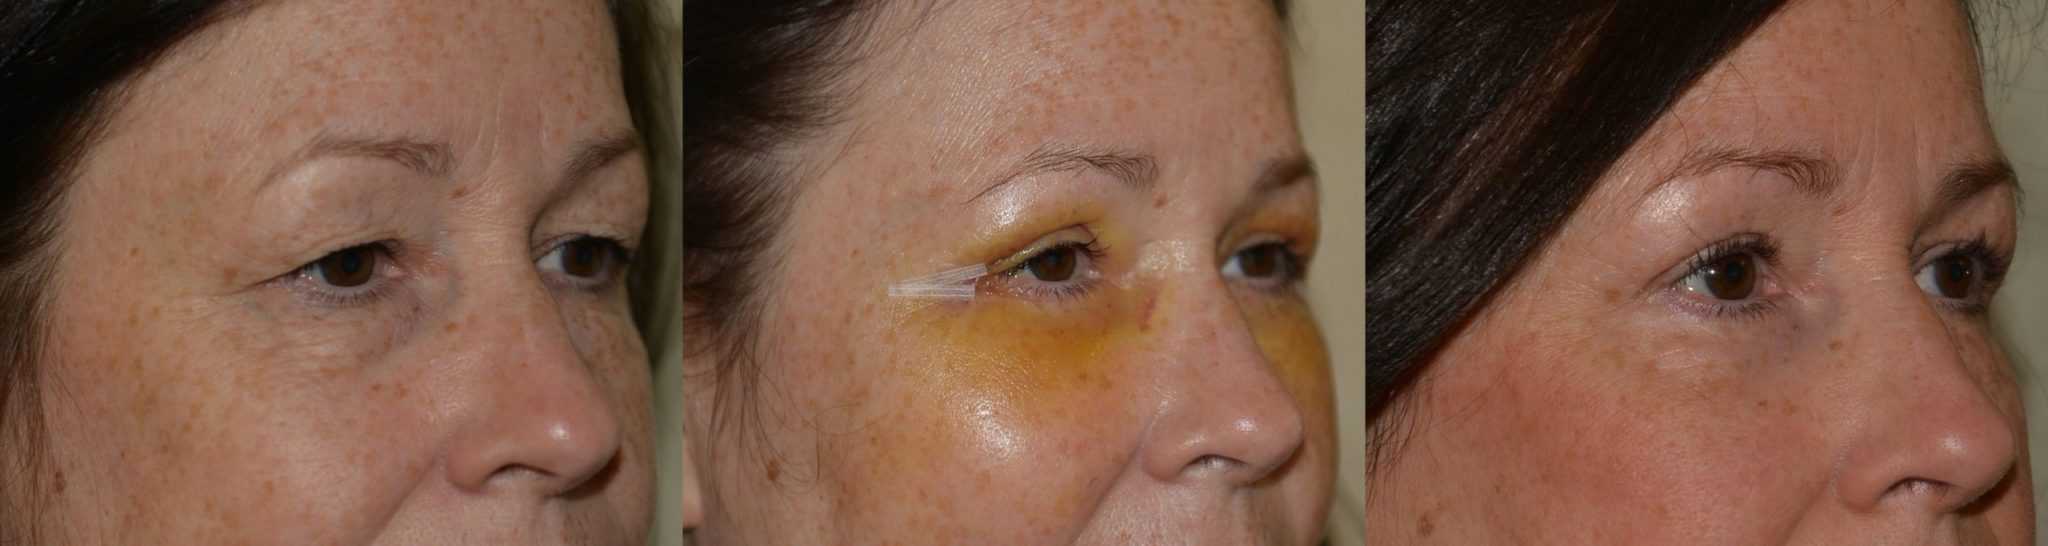 Eyelid surgery with fat transfer